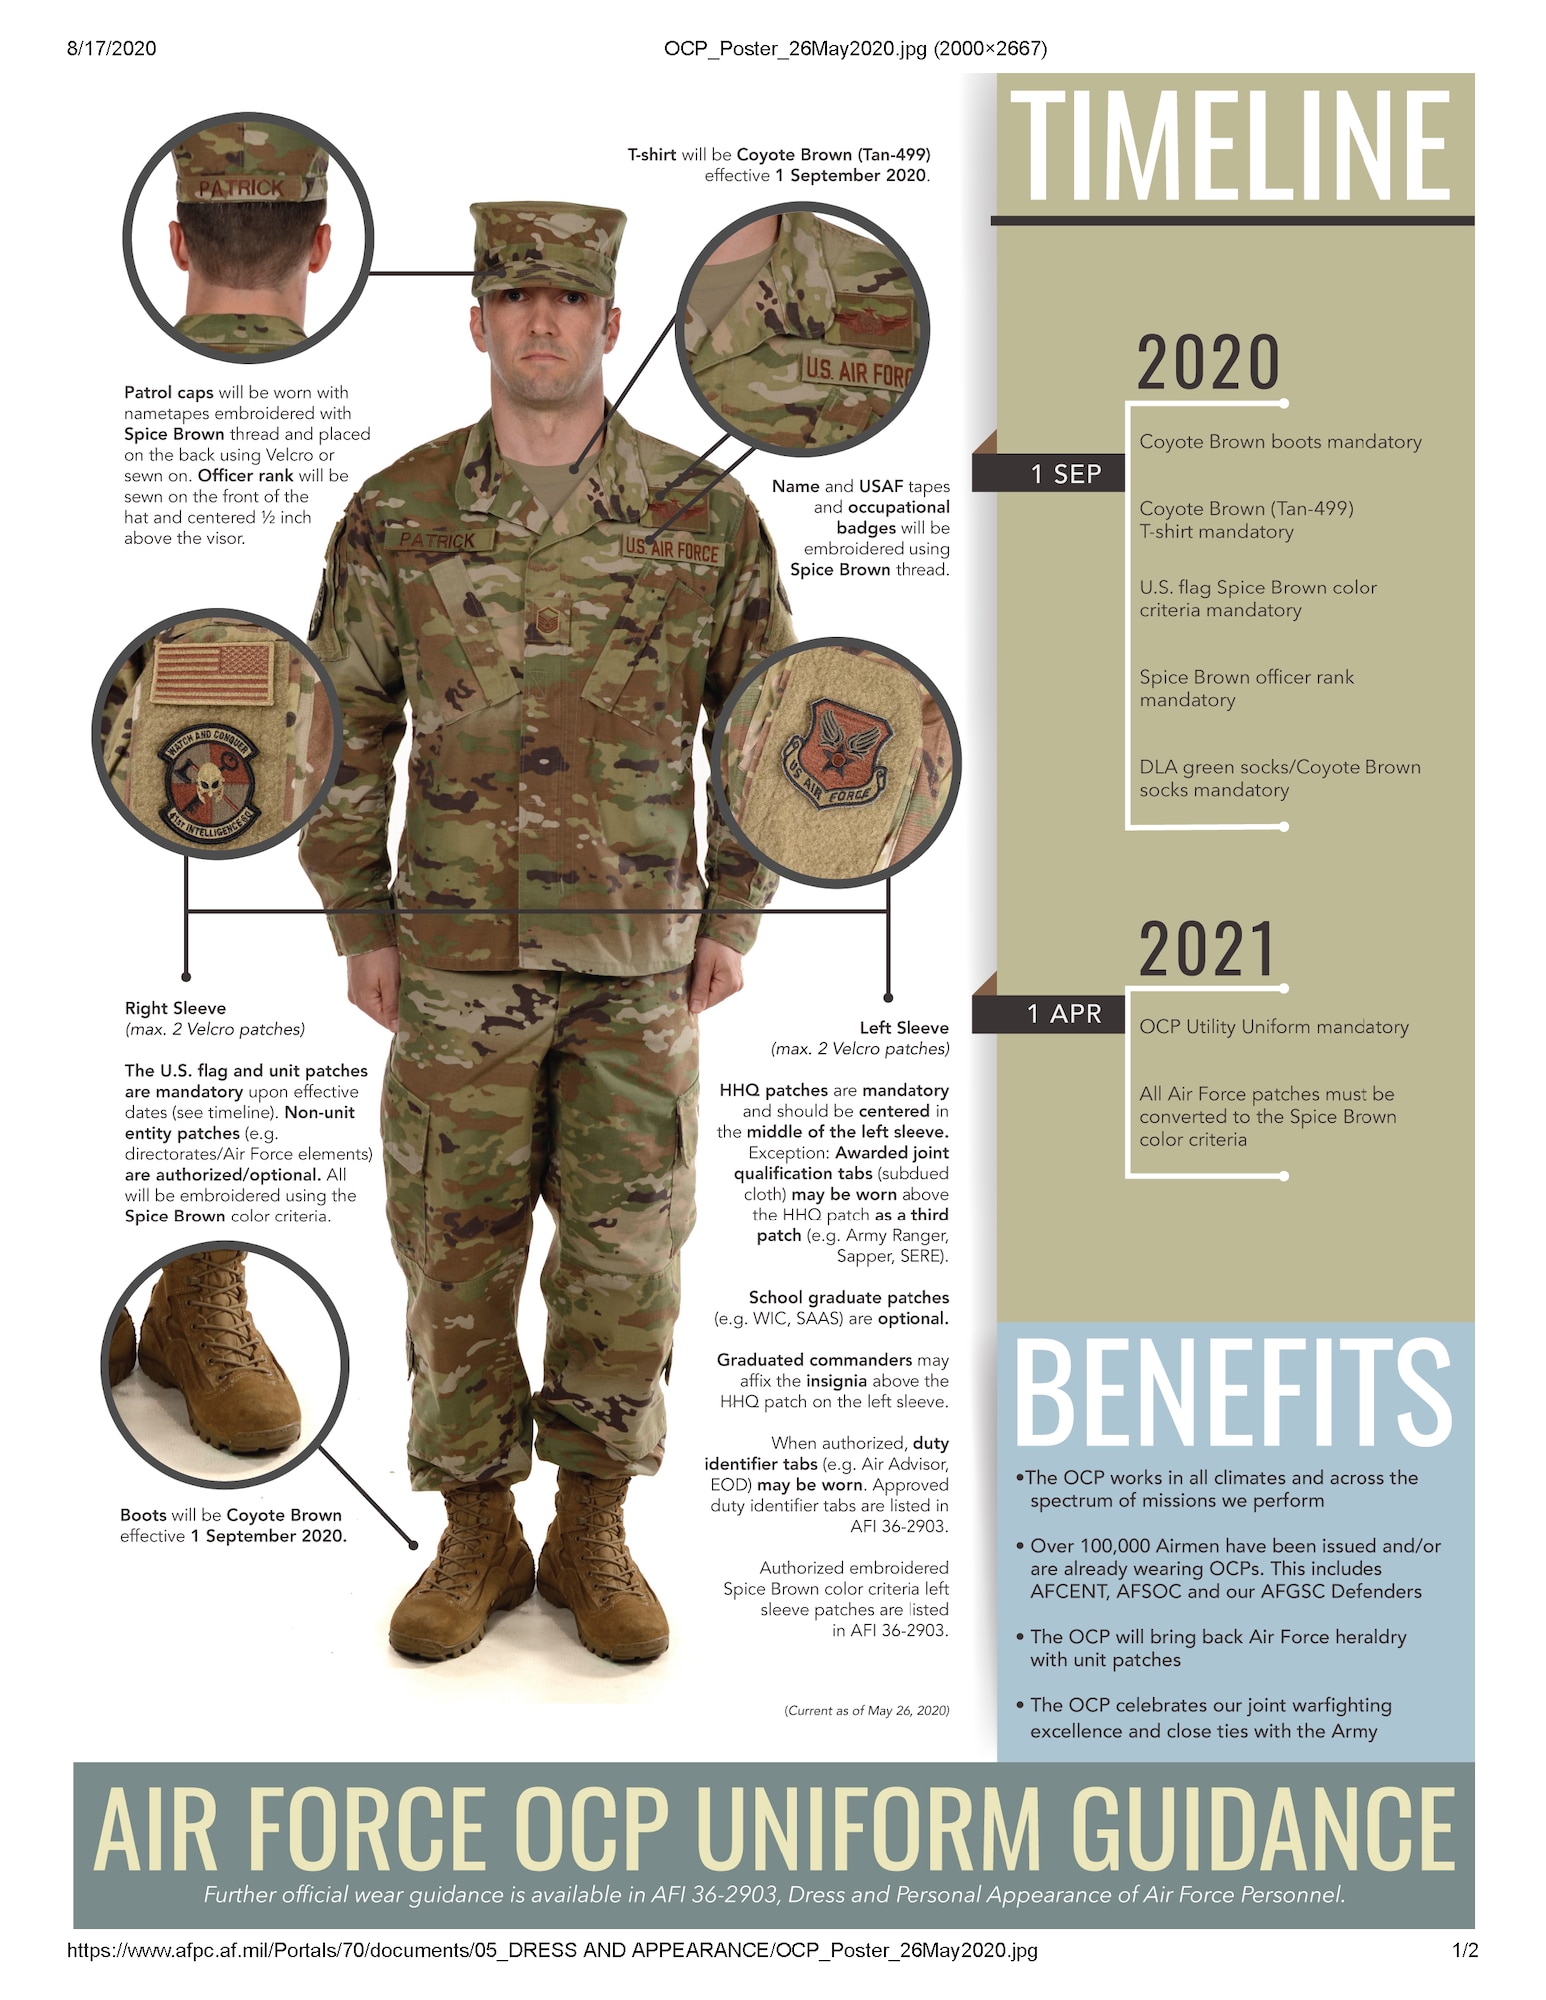 Stay up to date with current uniform guidance at https://www.afpc.af.mil/Career-Management/Dress-and-Appearance/